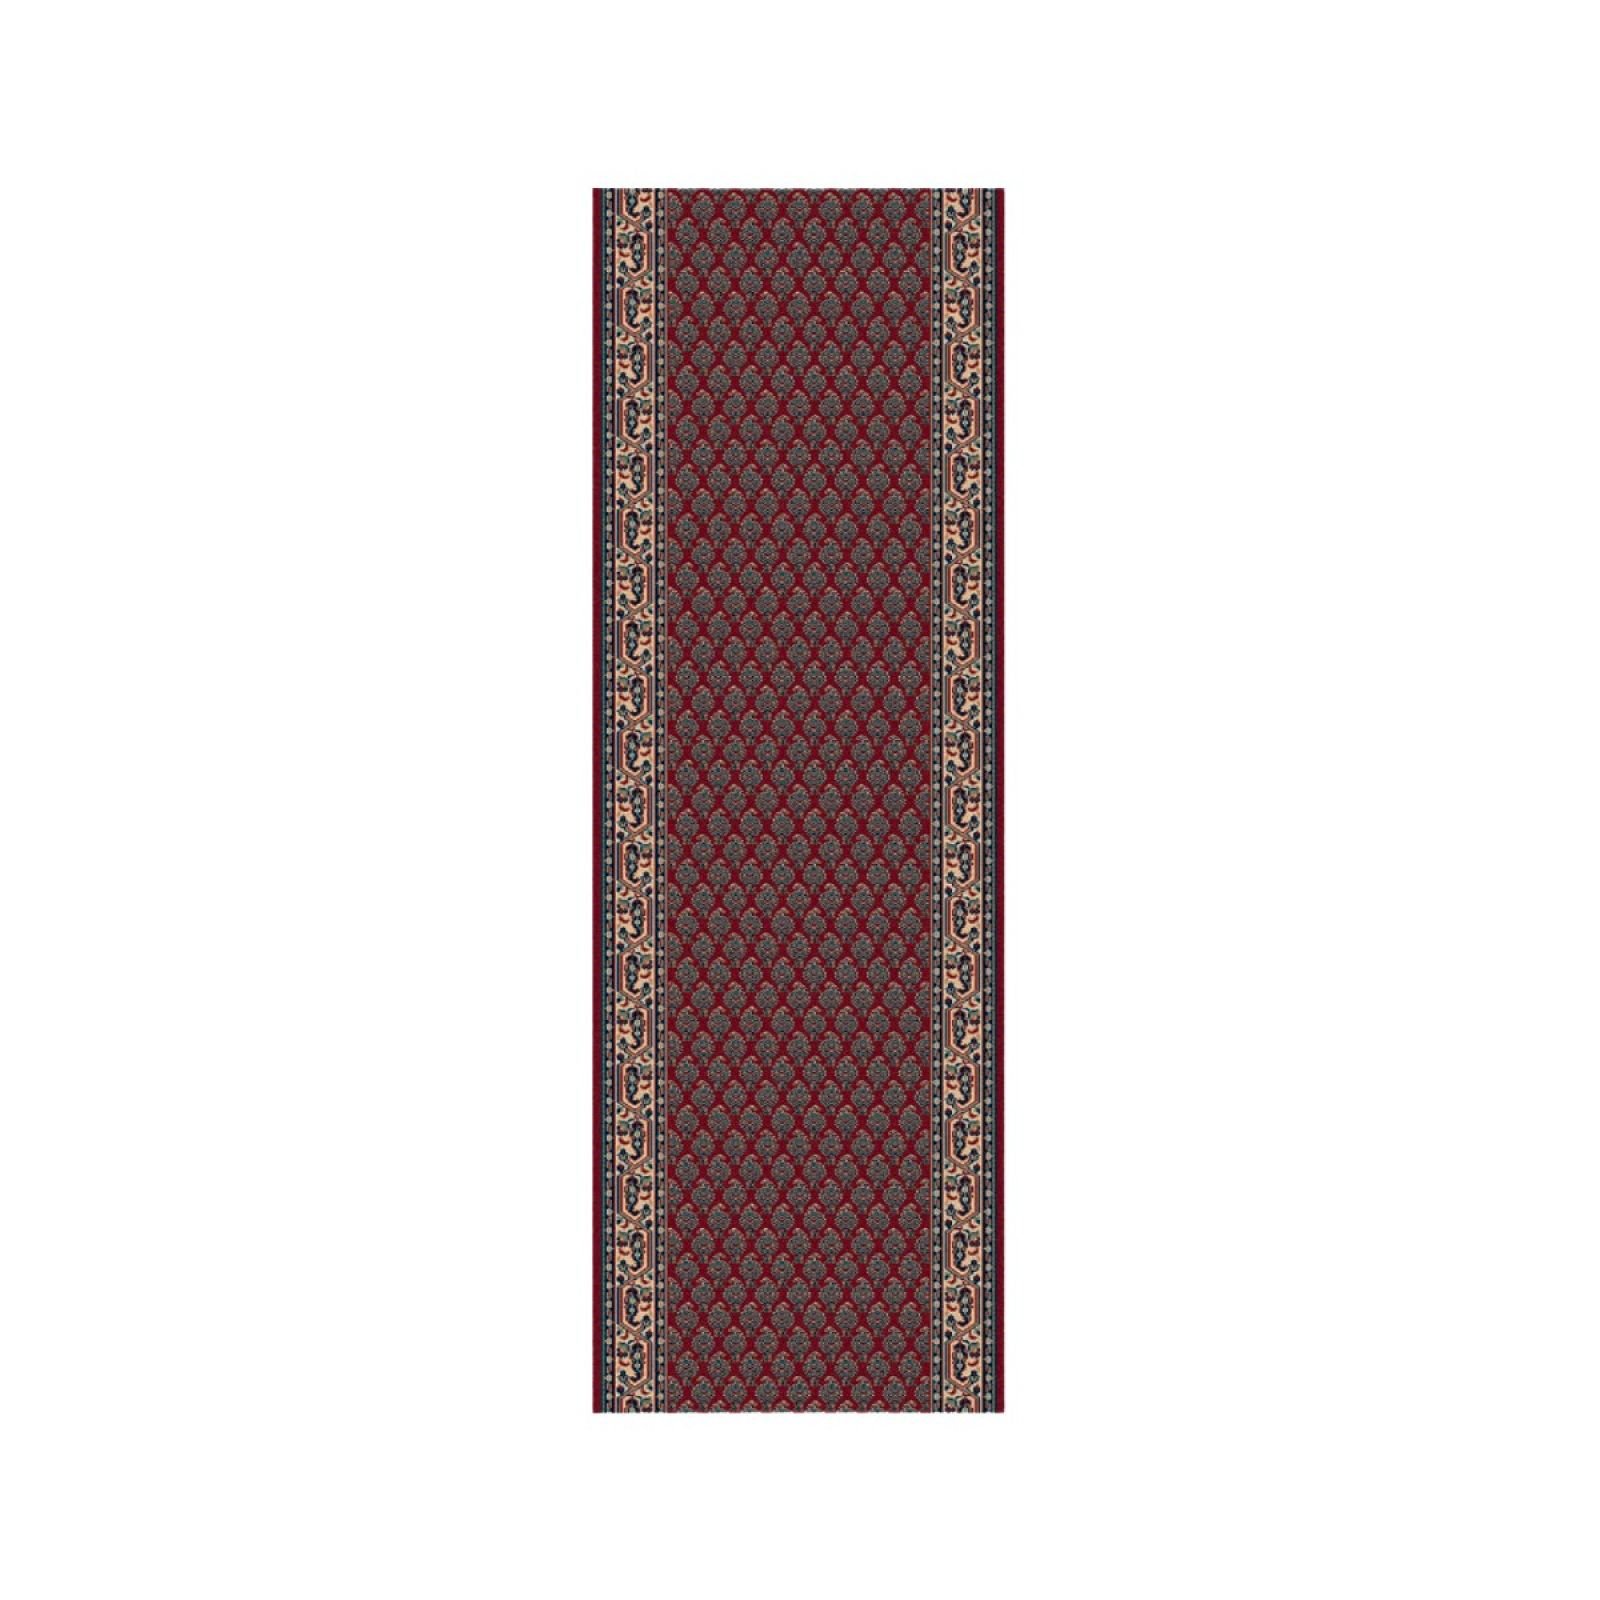 Victorian Stair Carpet Runner - style KO1181 in choice of Red, Beige/Brown and Beige/Red